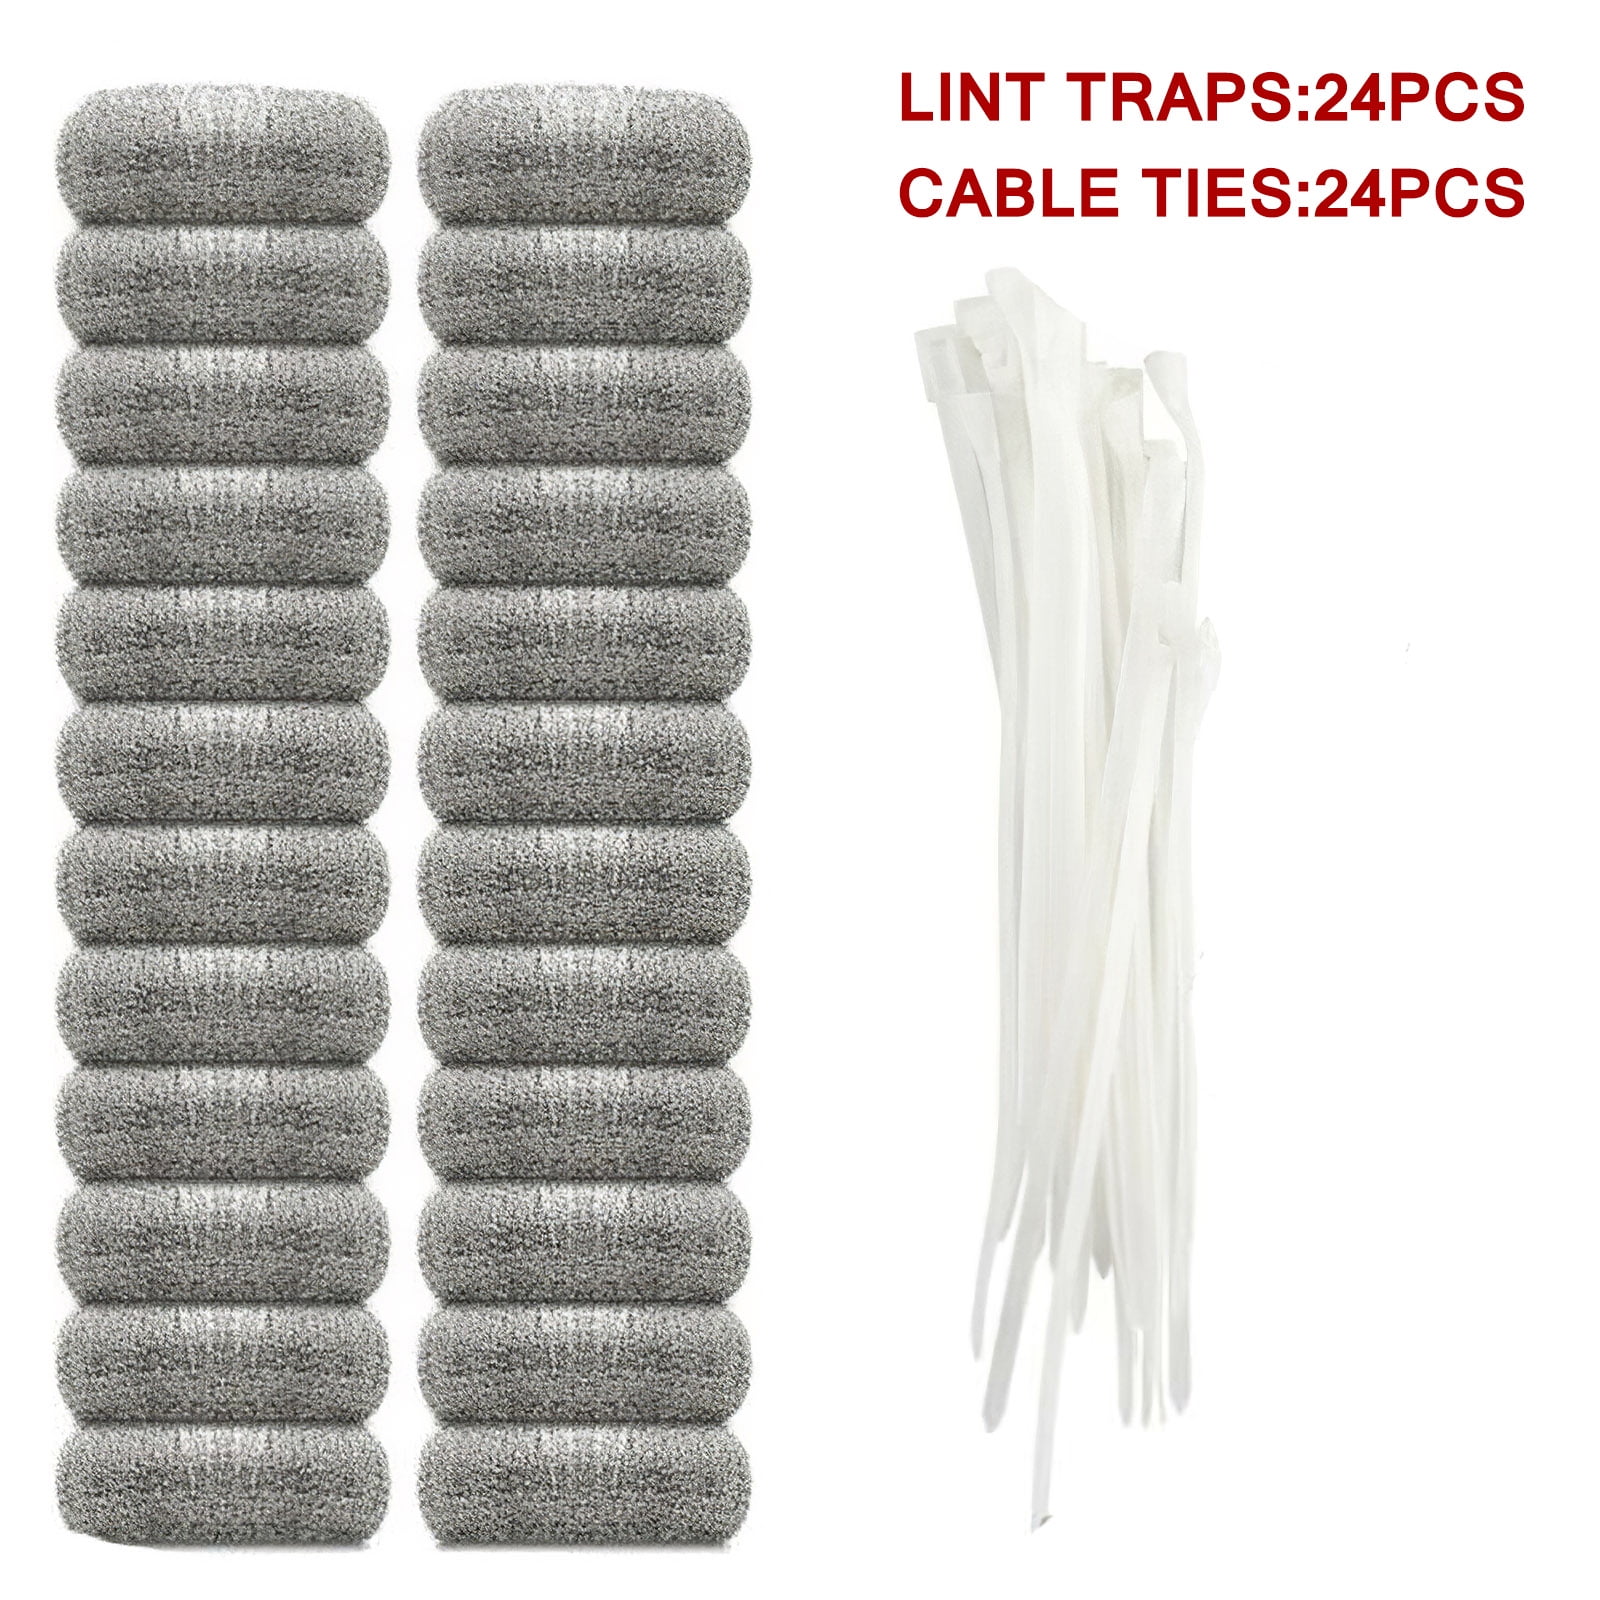 12pcs, Lint Traps, Lint Catcher For Washing Machine, Washer Hose Lint Traps  With Cable Ties, Laundry Mesh Washer Sink Drain Hose Screen Filter, Cleani